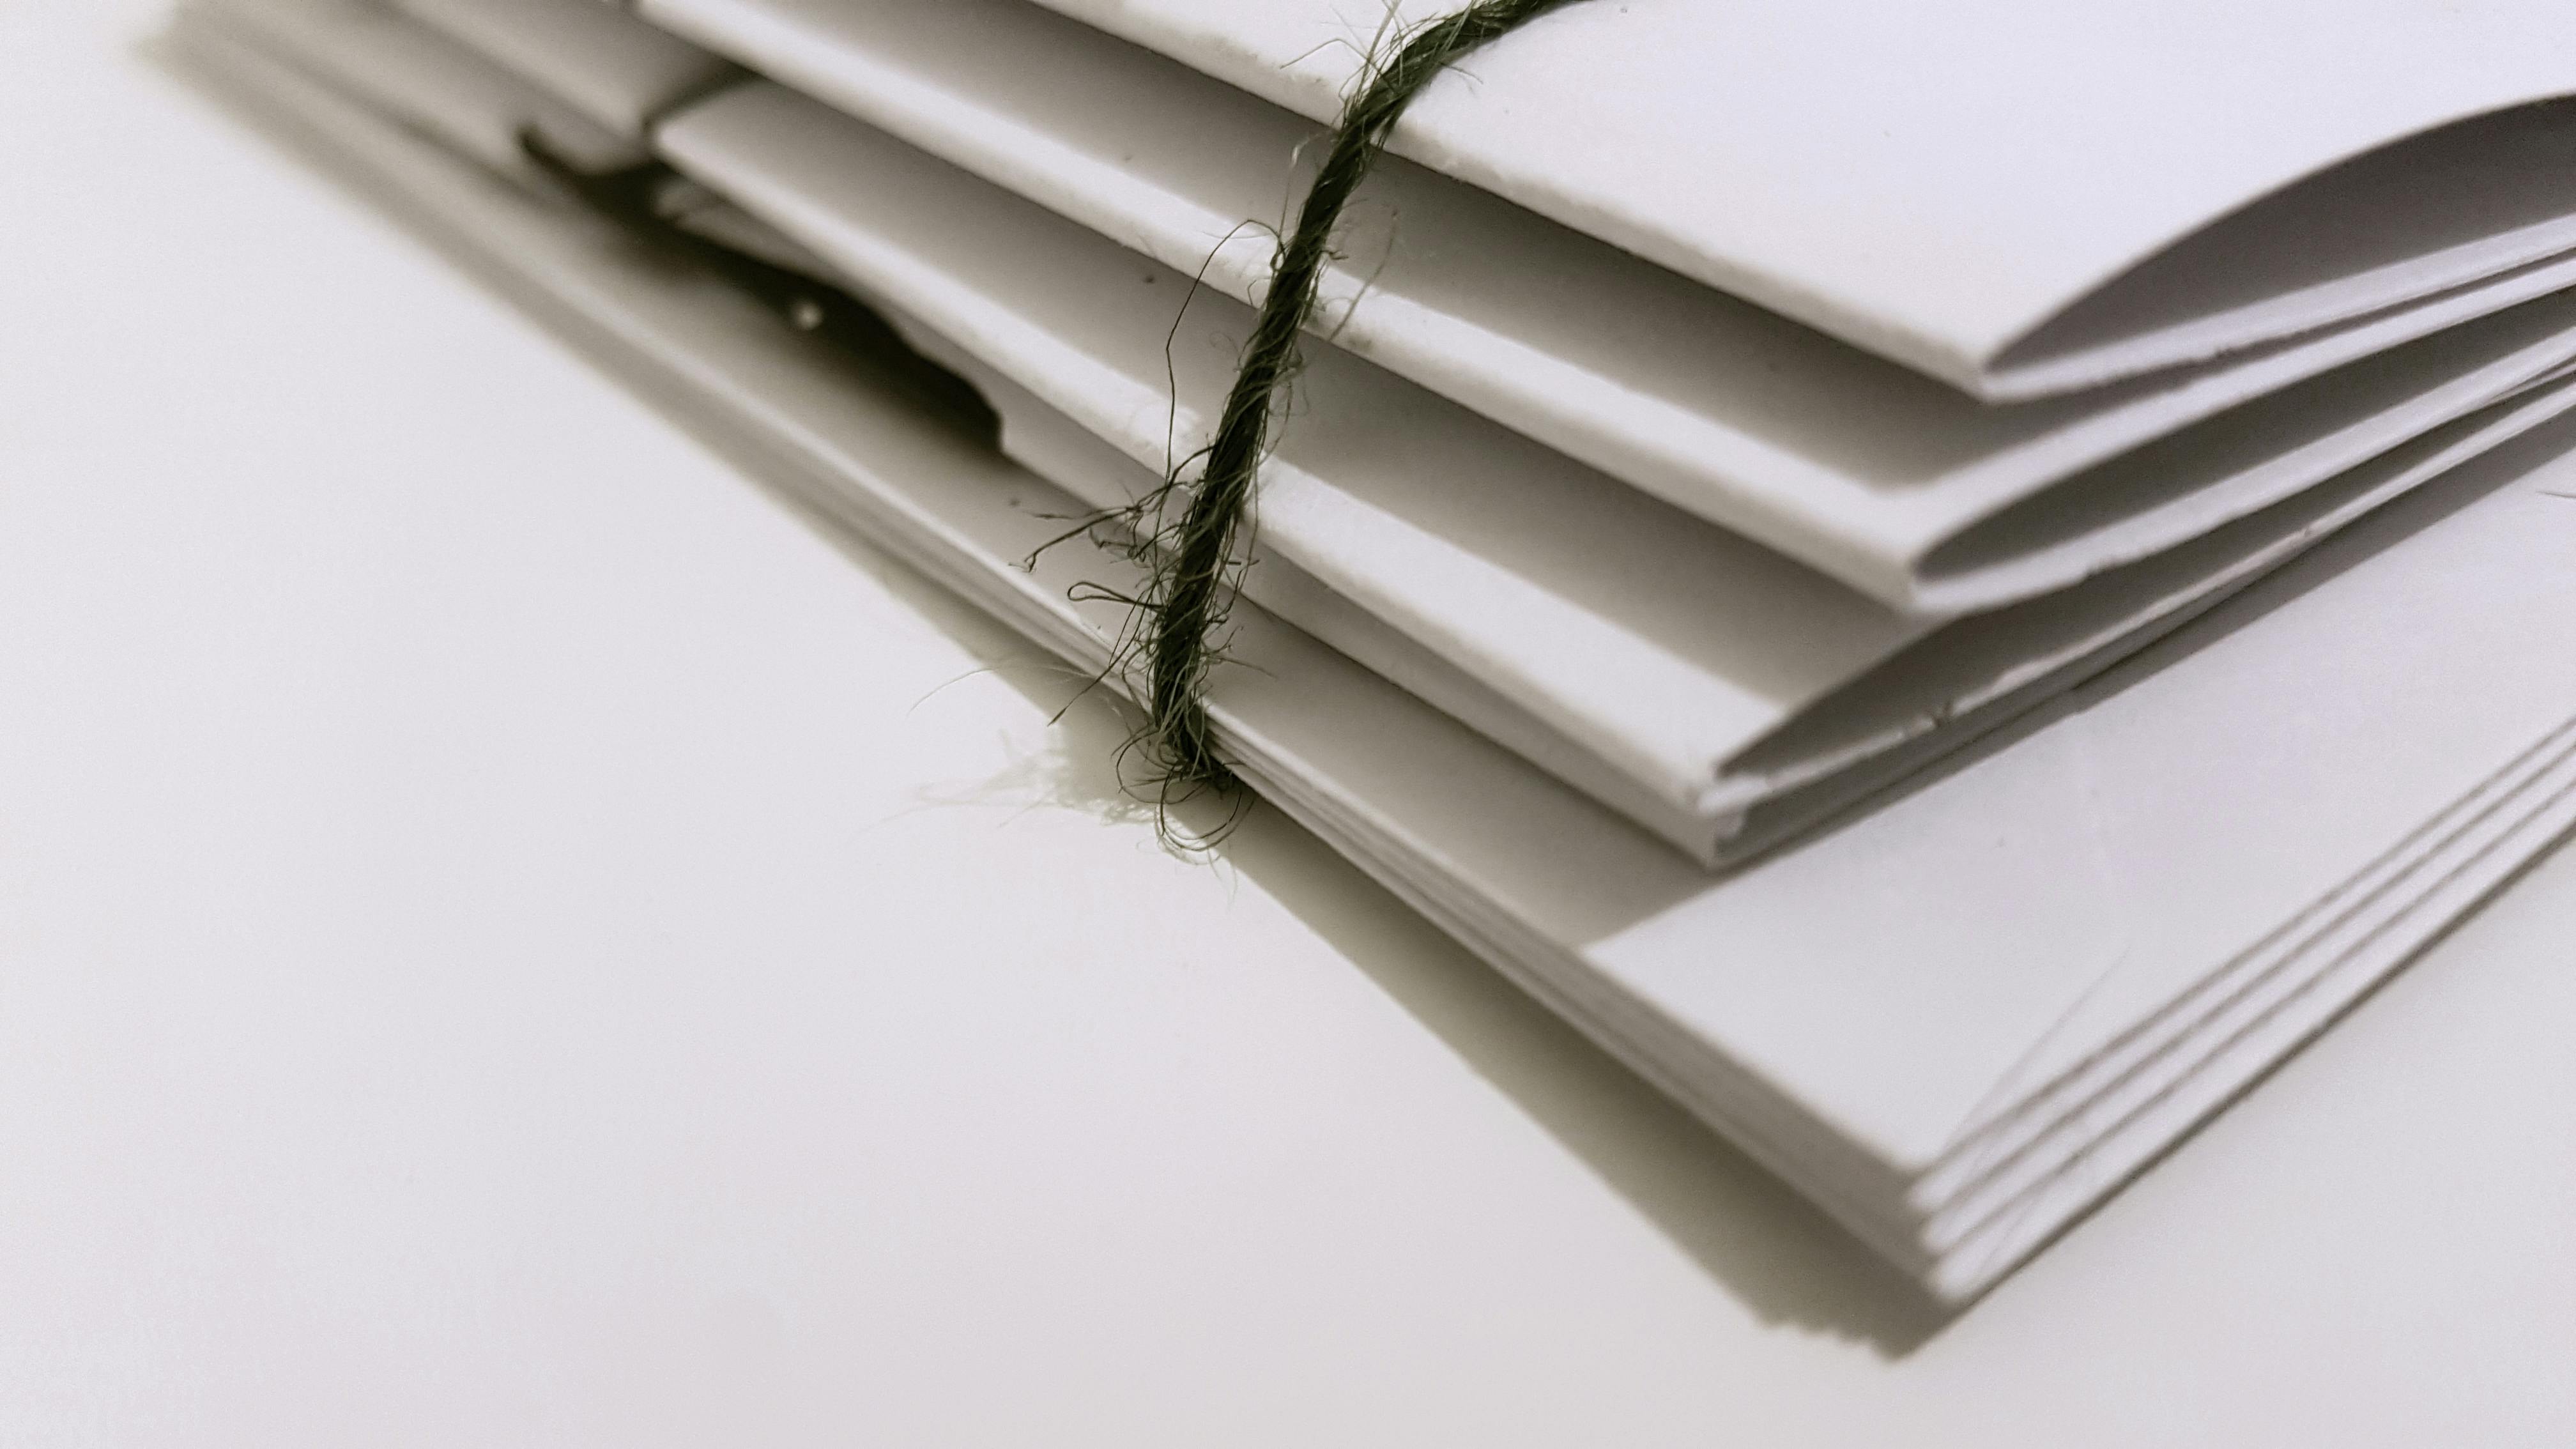 A stack of documents | Source: Pexels